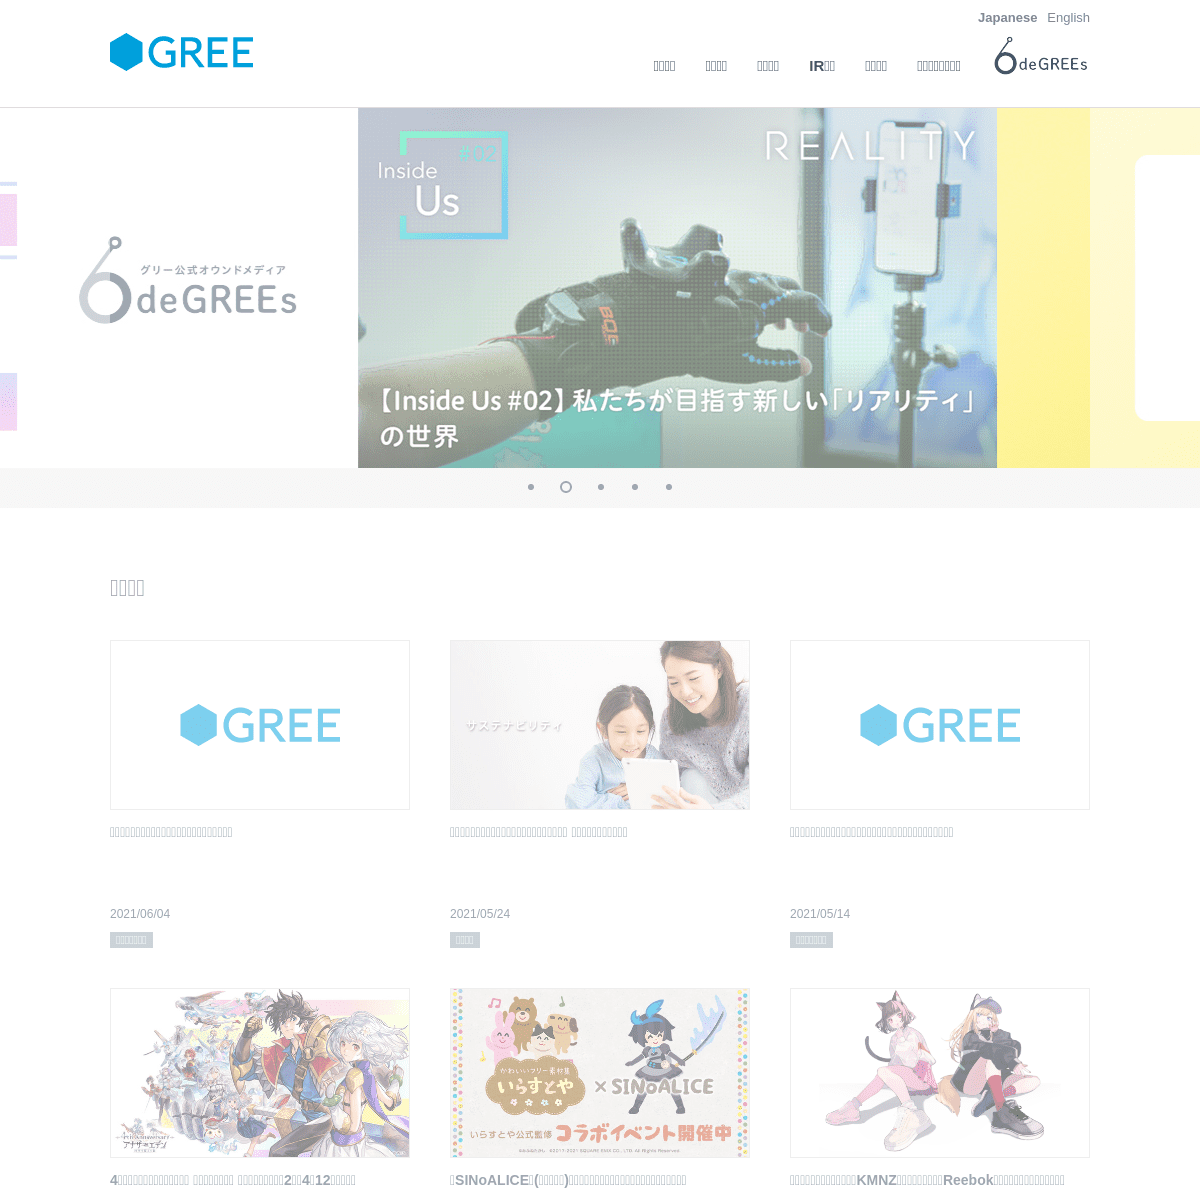 A complete backup of https://gree.co.jp